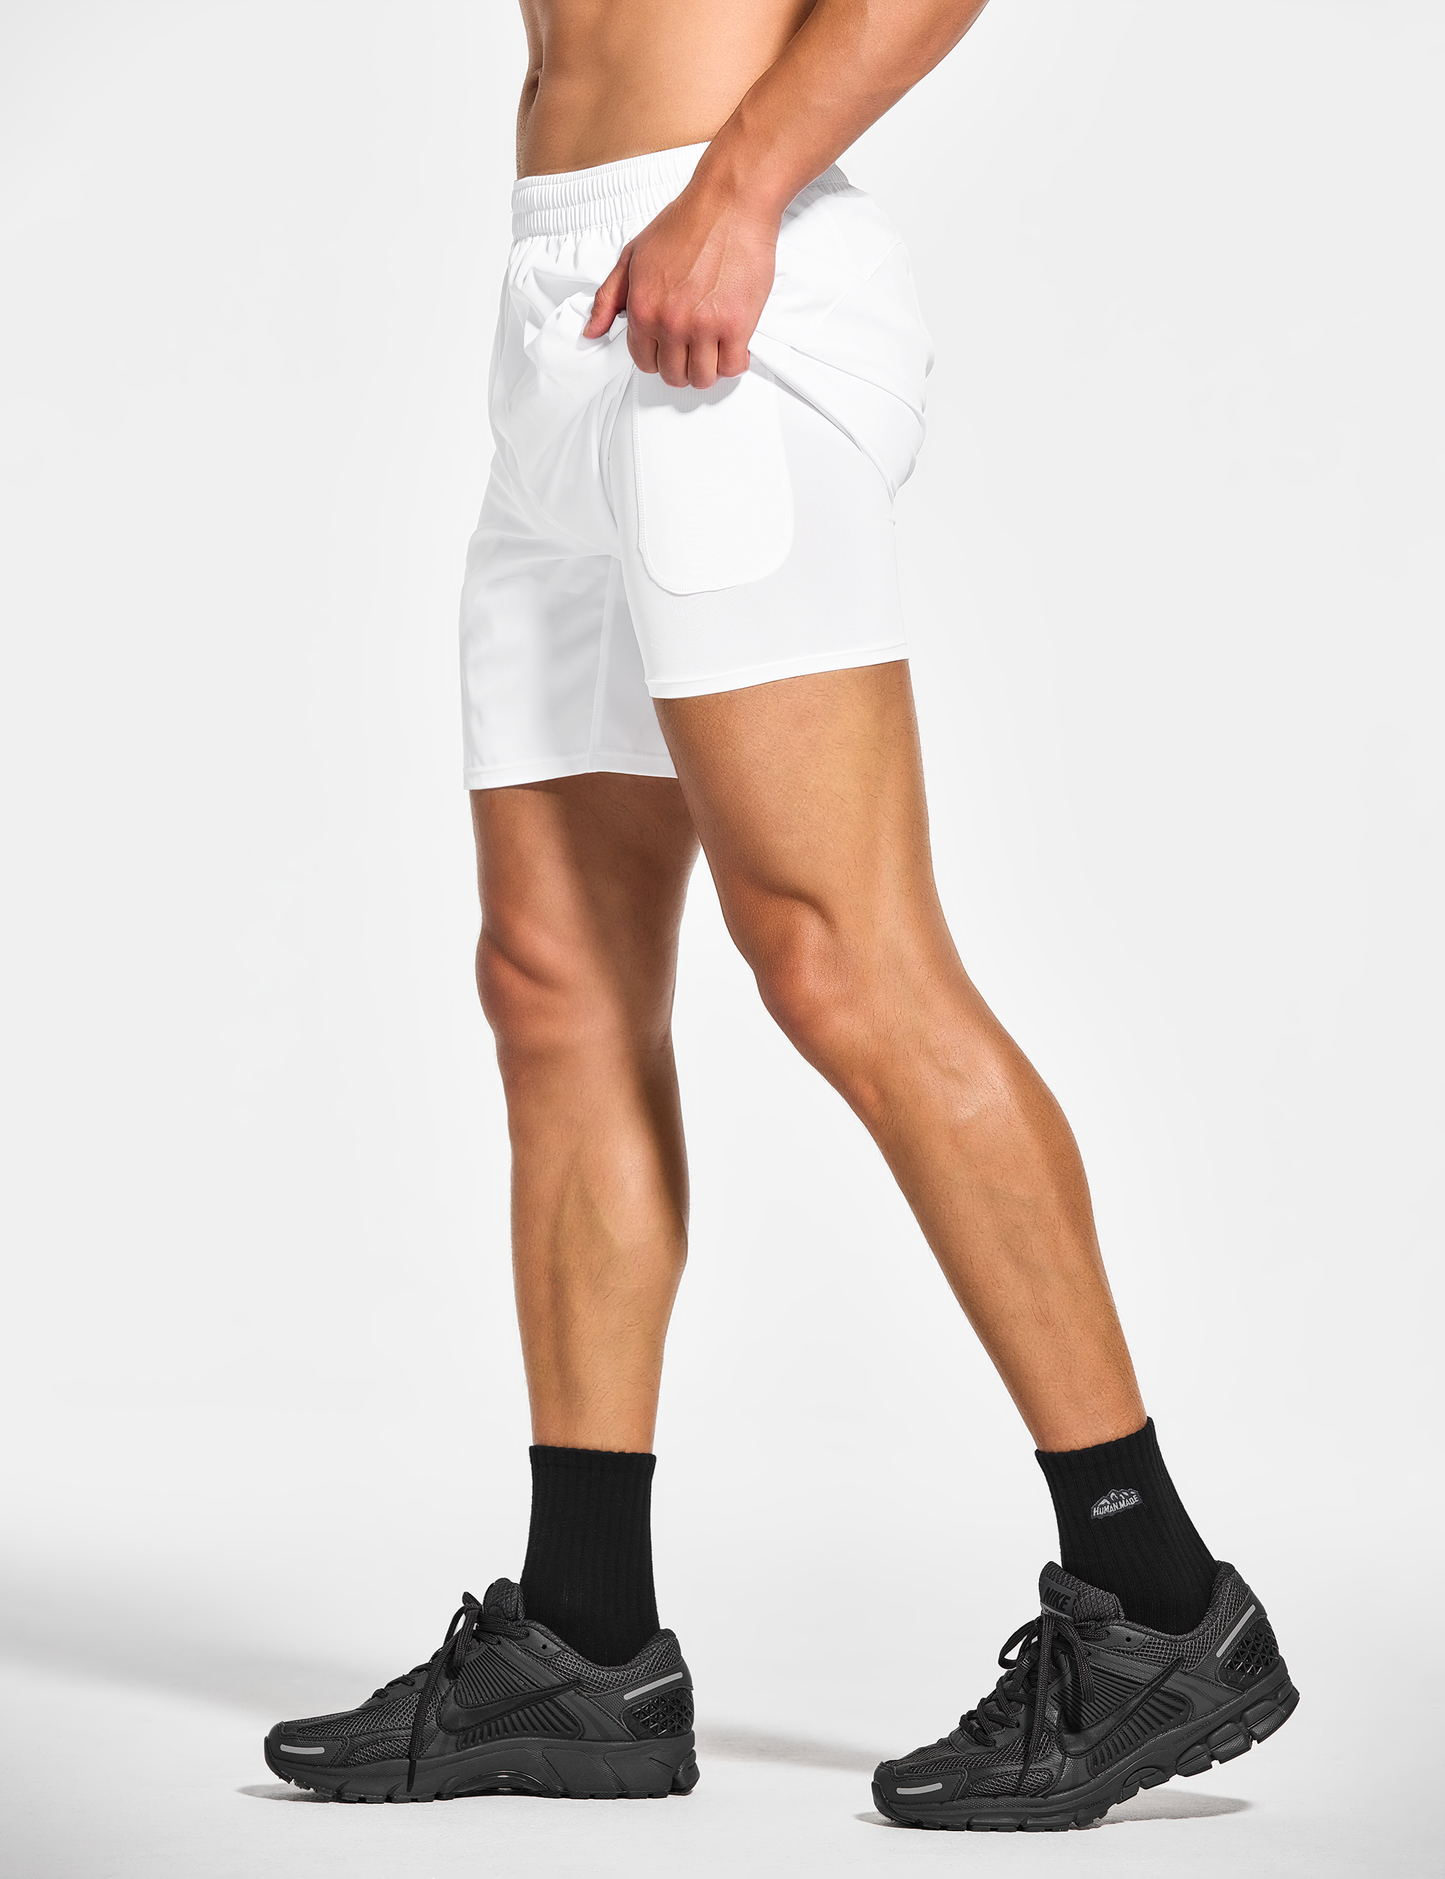 mens 7 inch lined workout running tennis gym shorts with pockets white